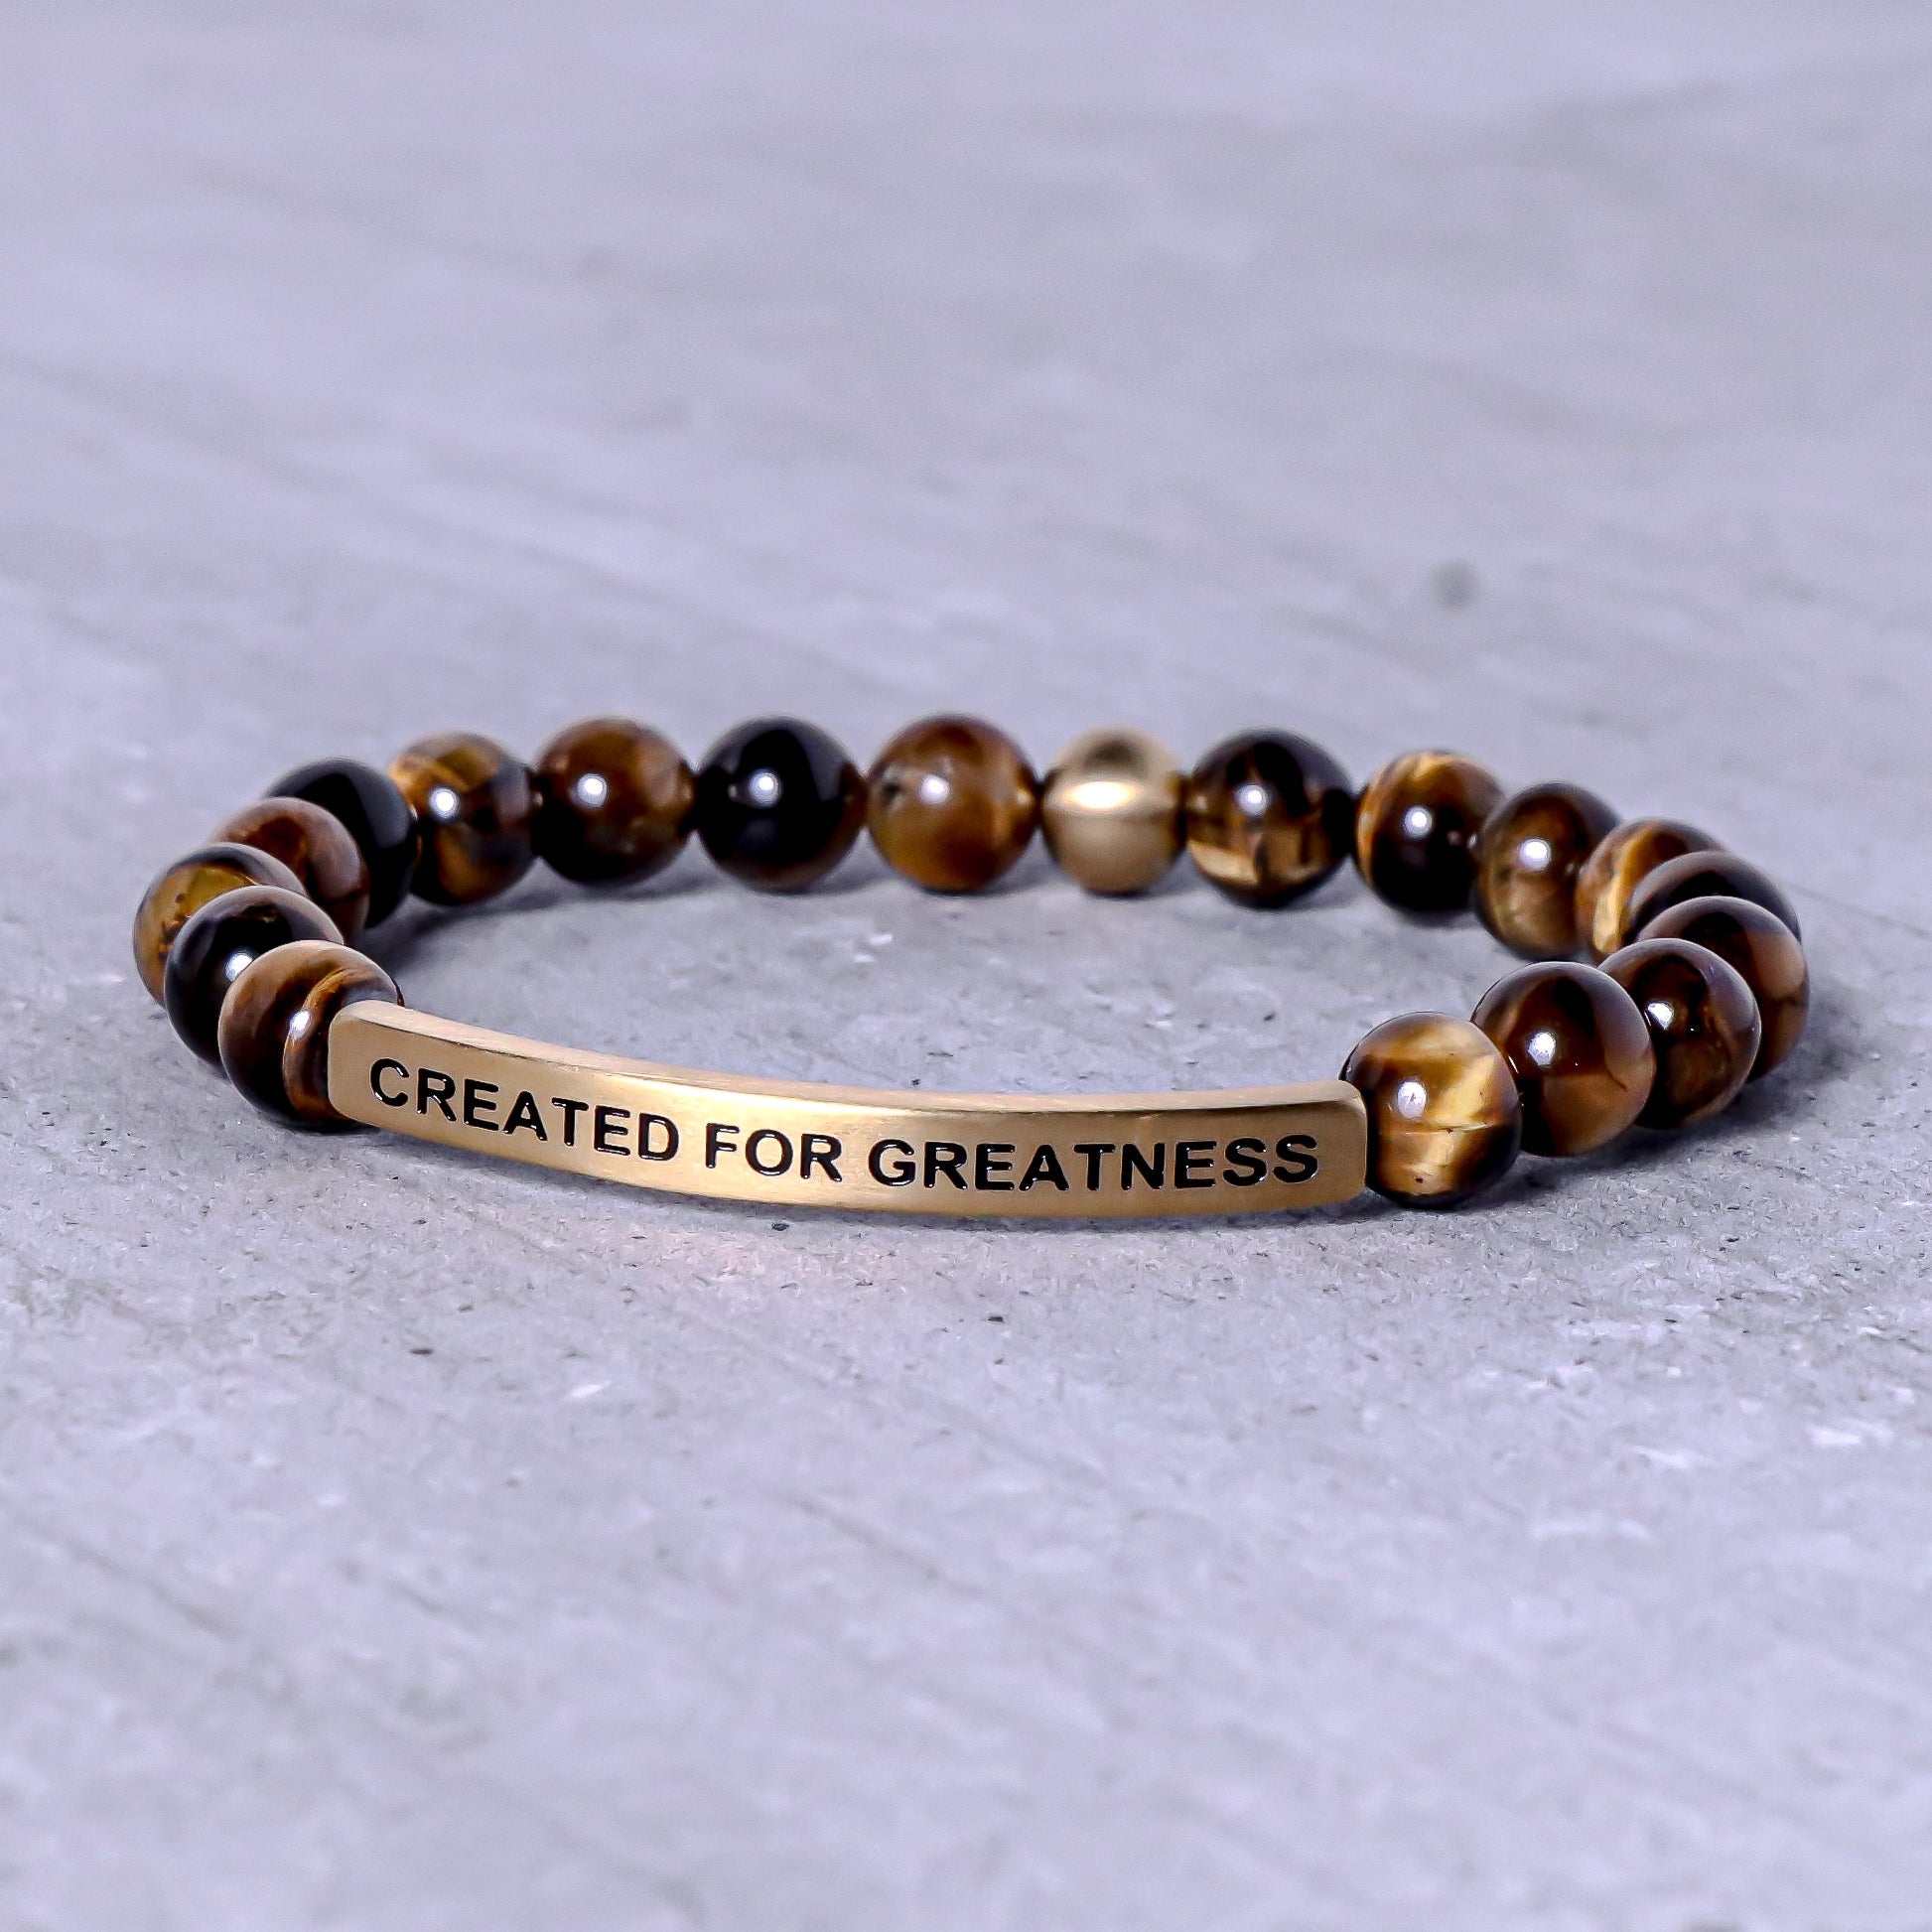 CREATED FOR GREATNESS - Mens Collection - Inspiration Co.